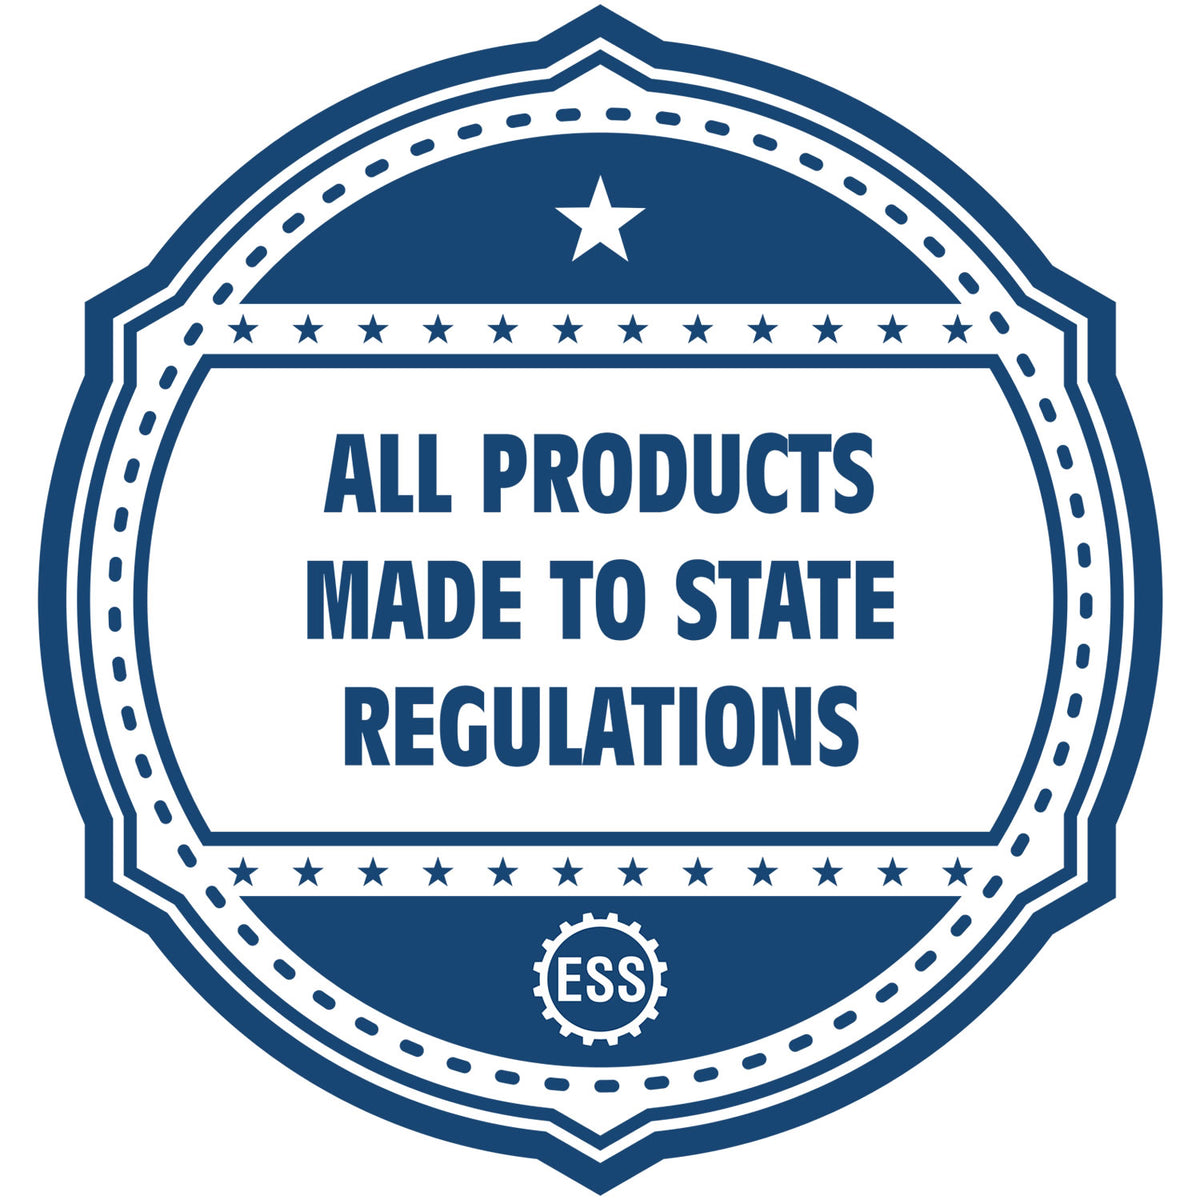 An icon or badge element for the District of Columbia Landscape Architectural Seal Stamp showing that this product is made in compliance with state regulations.